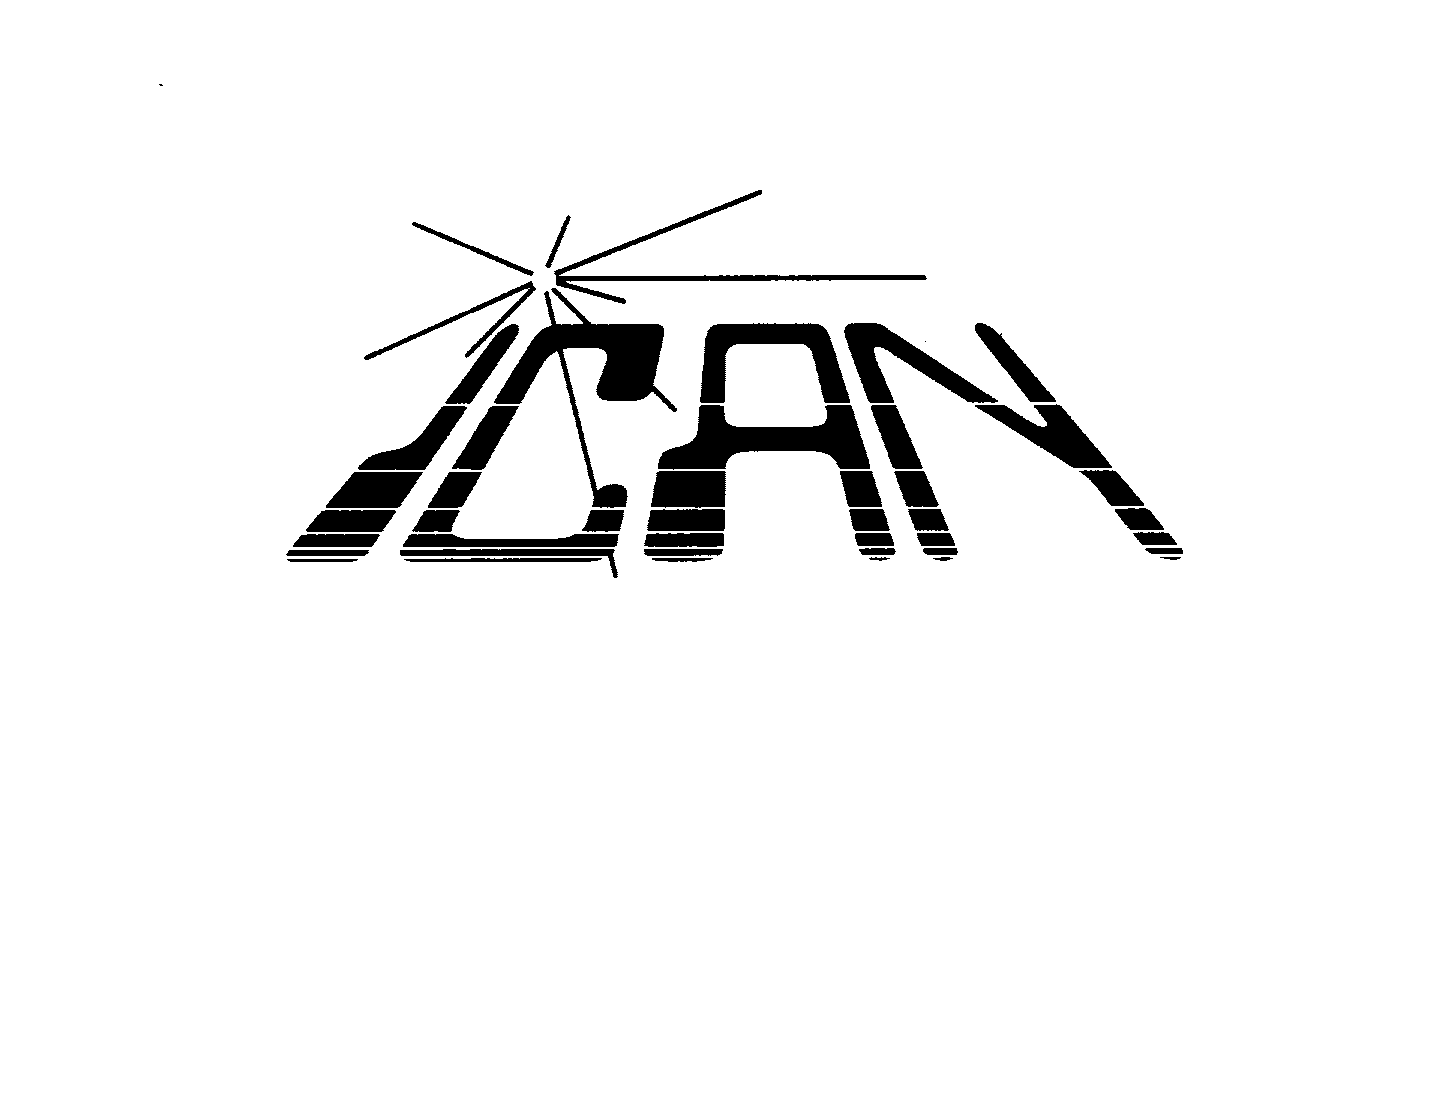  ICAN